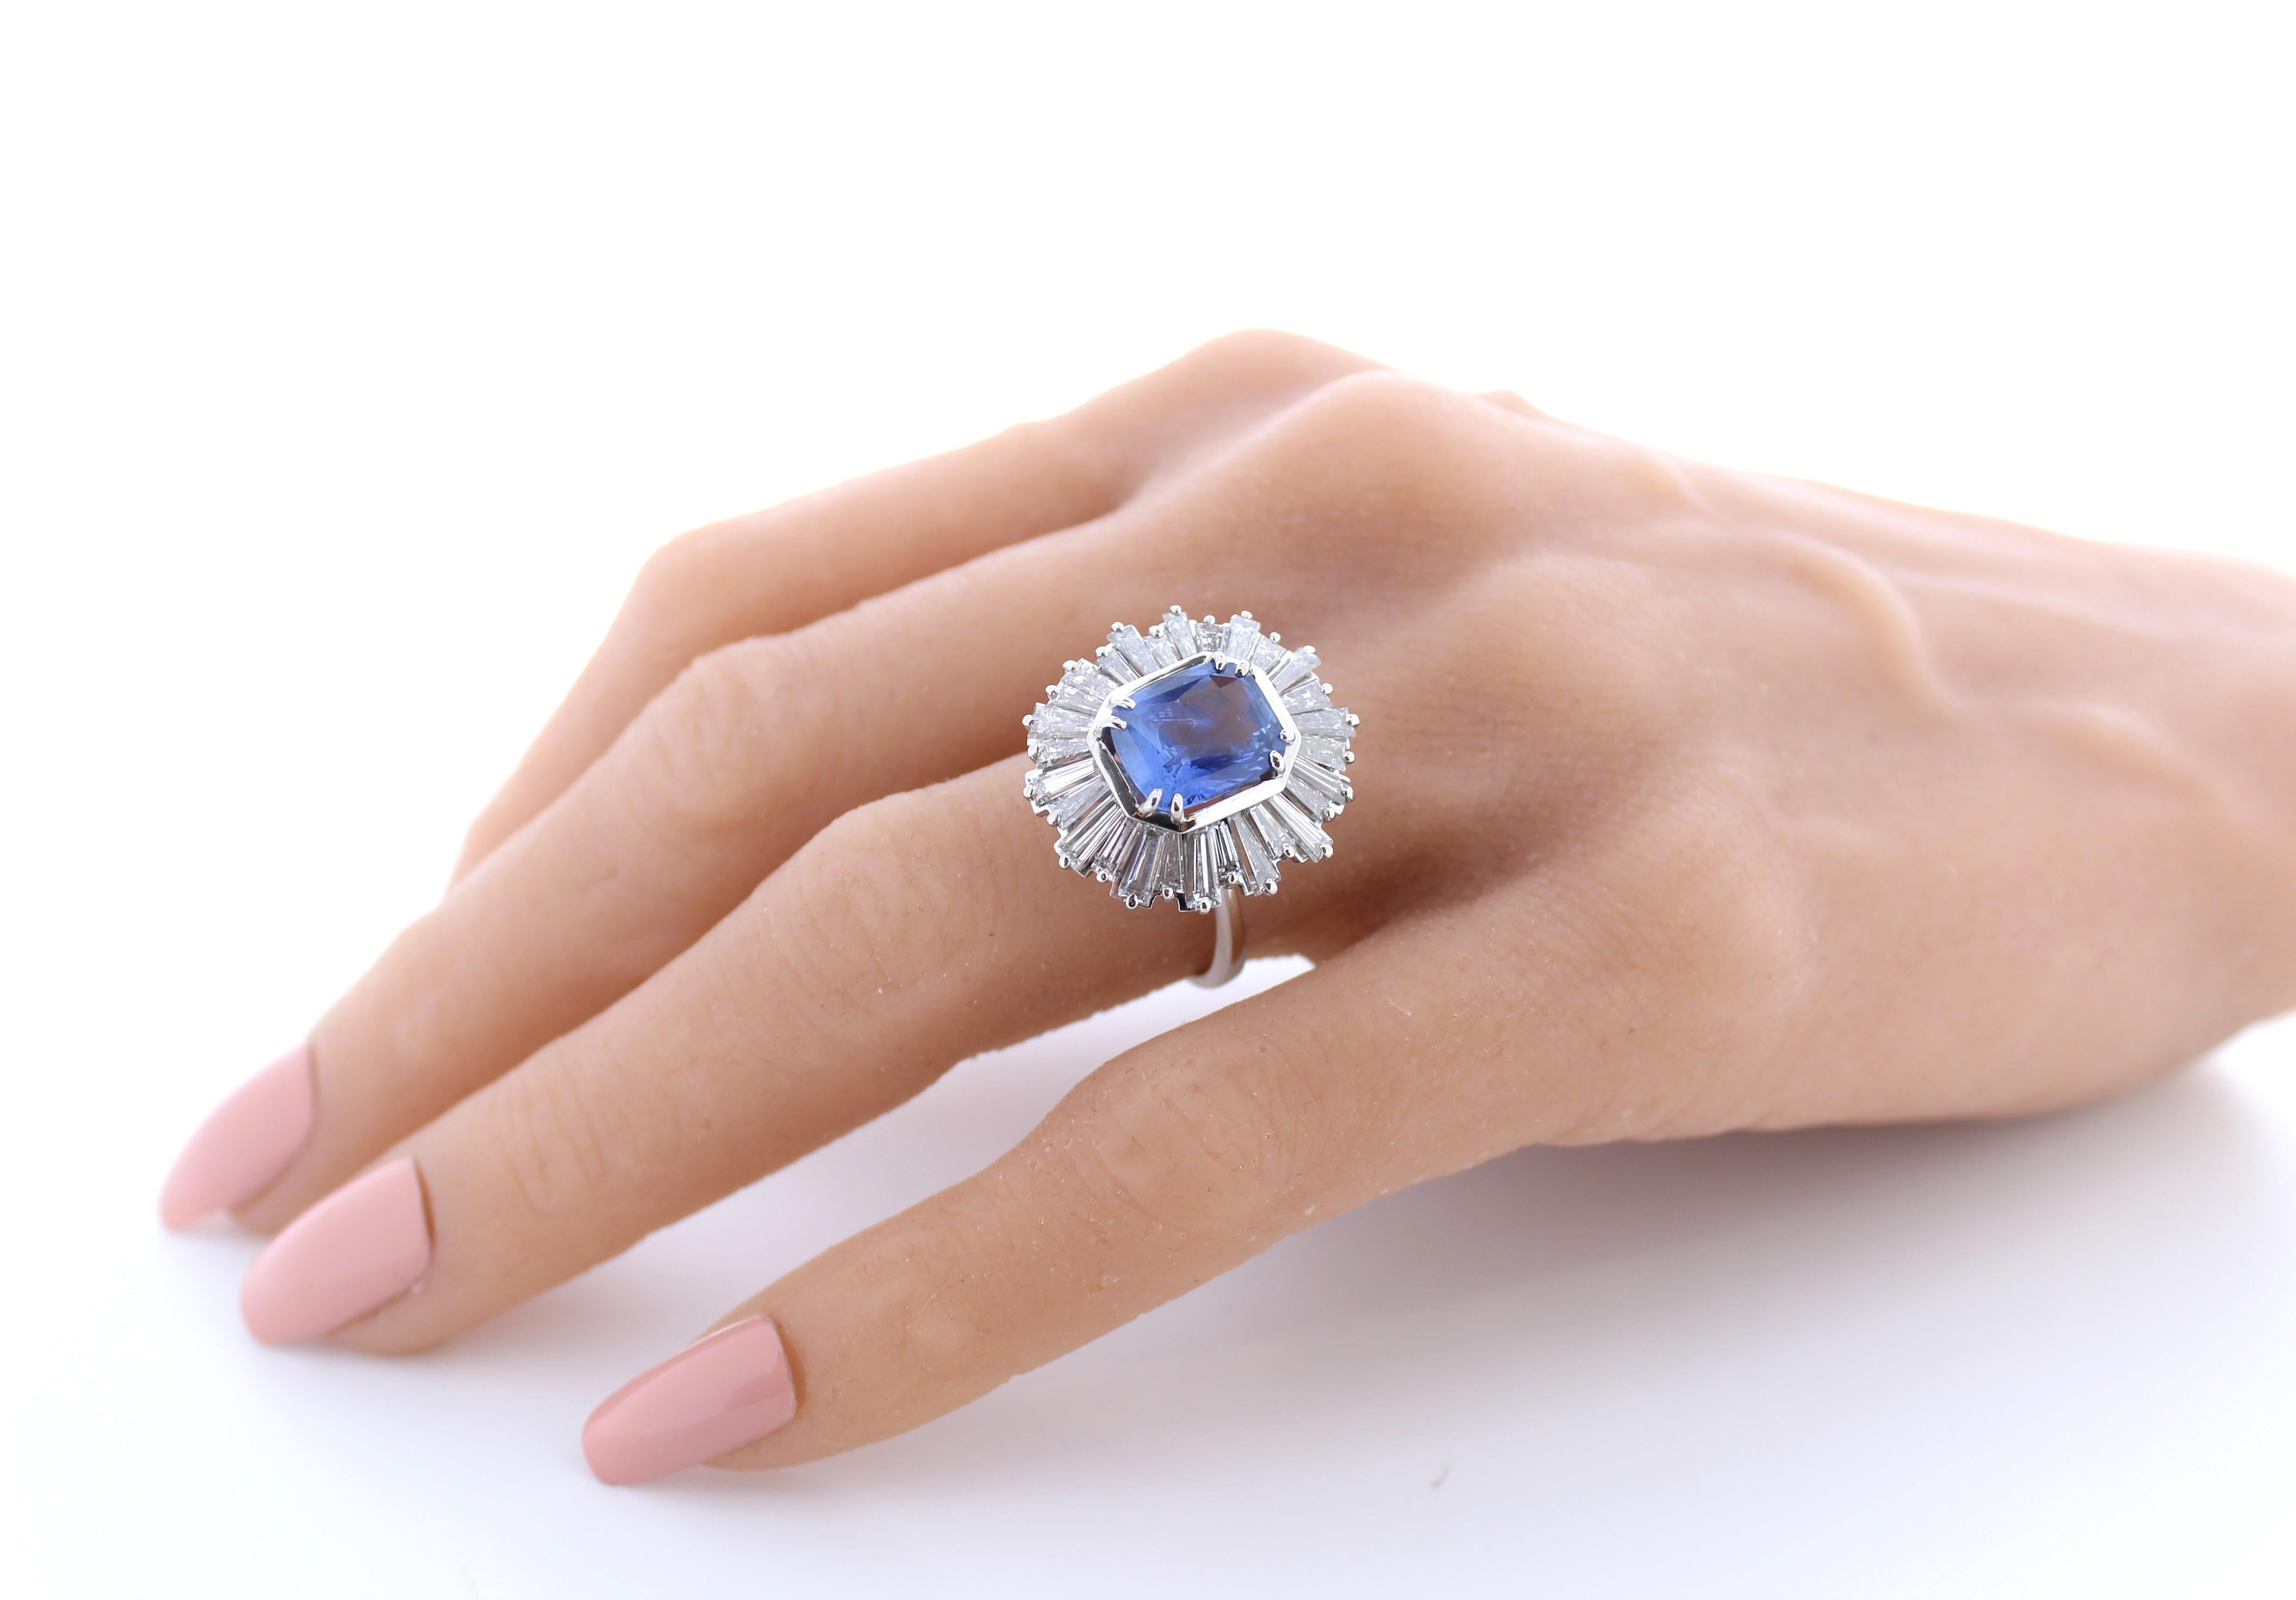 A fashion ring featuring a combination of platinum with a main stone of a certified unheated blue sapphire weighing 4.07 carats in a cushion cut, accompanied by 28 baguette-cut diamonds totaling 3 carats as side stones, would be an exquisite and